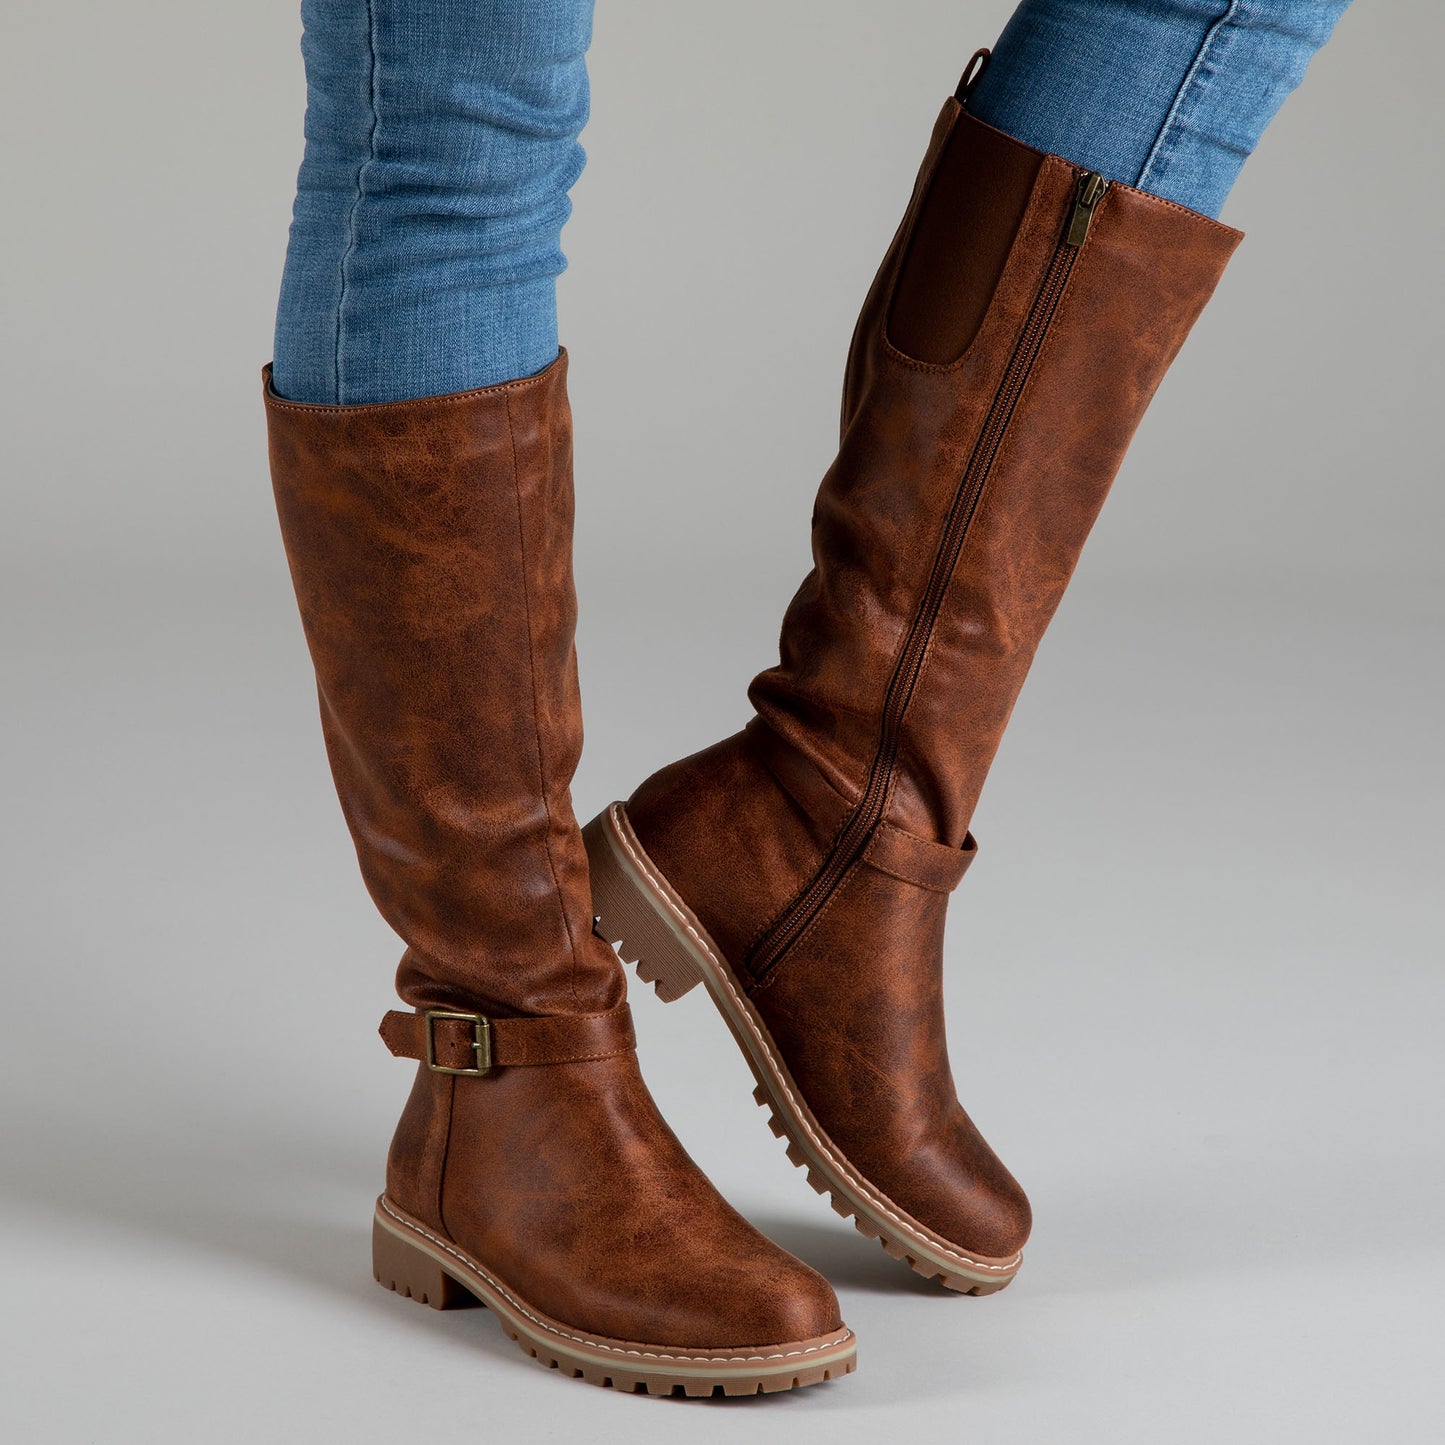 Corkys Giddy Up Cognac Distressed Boots